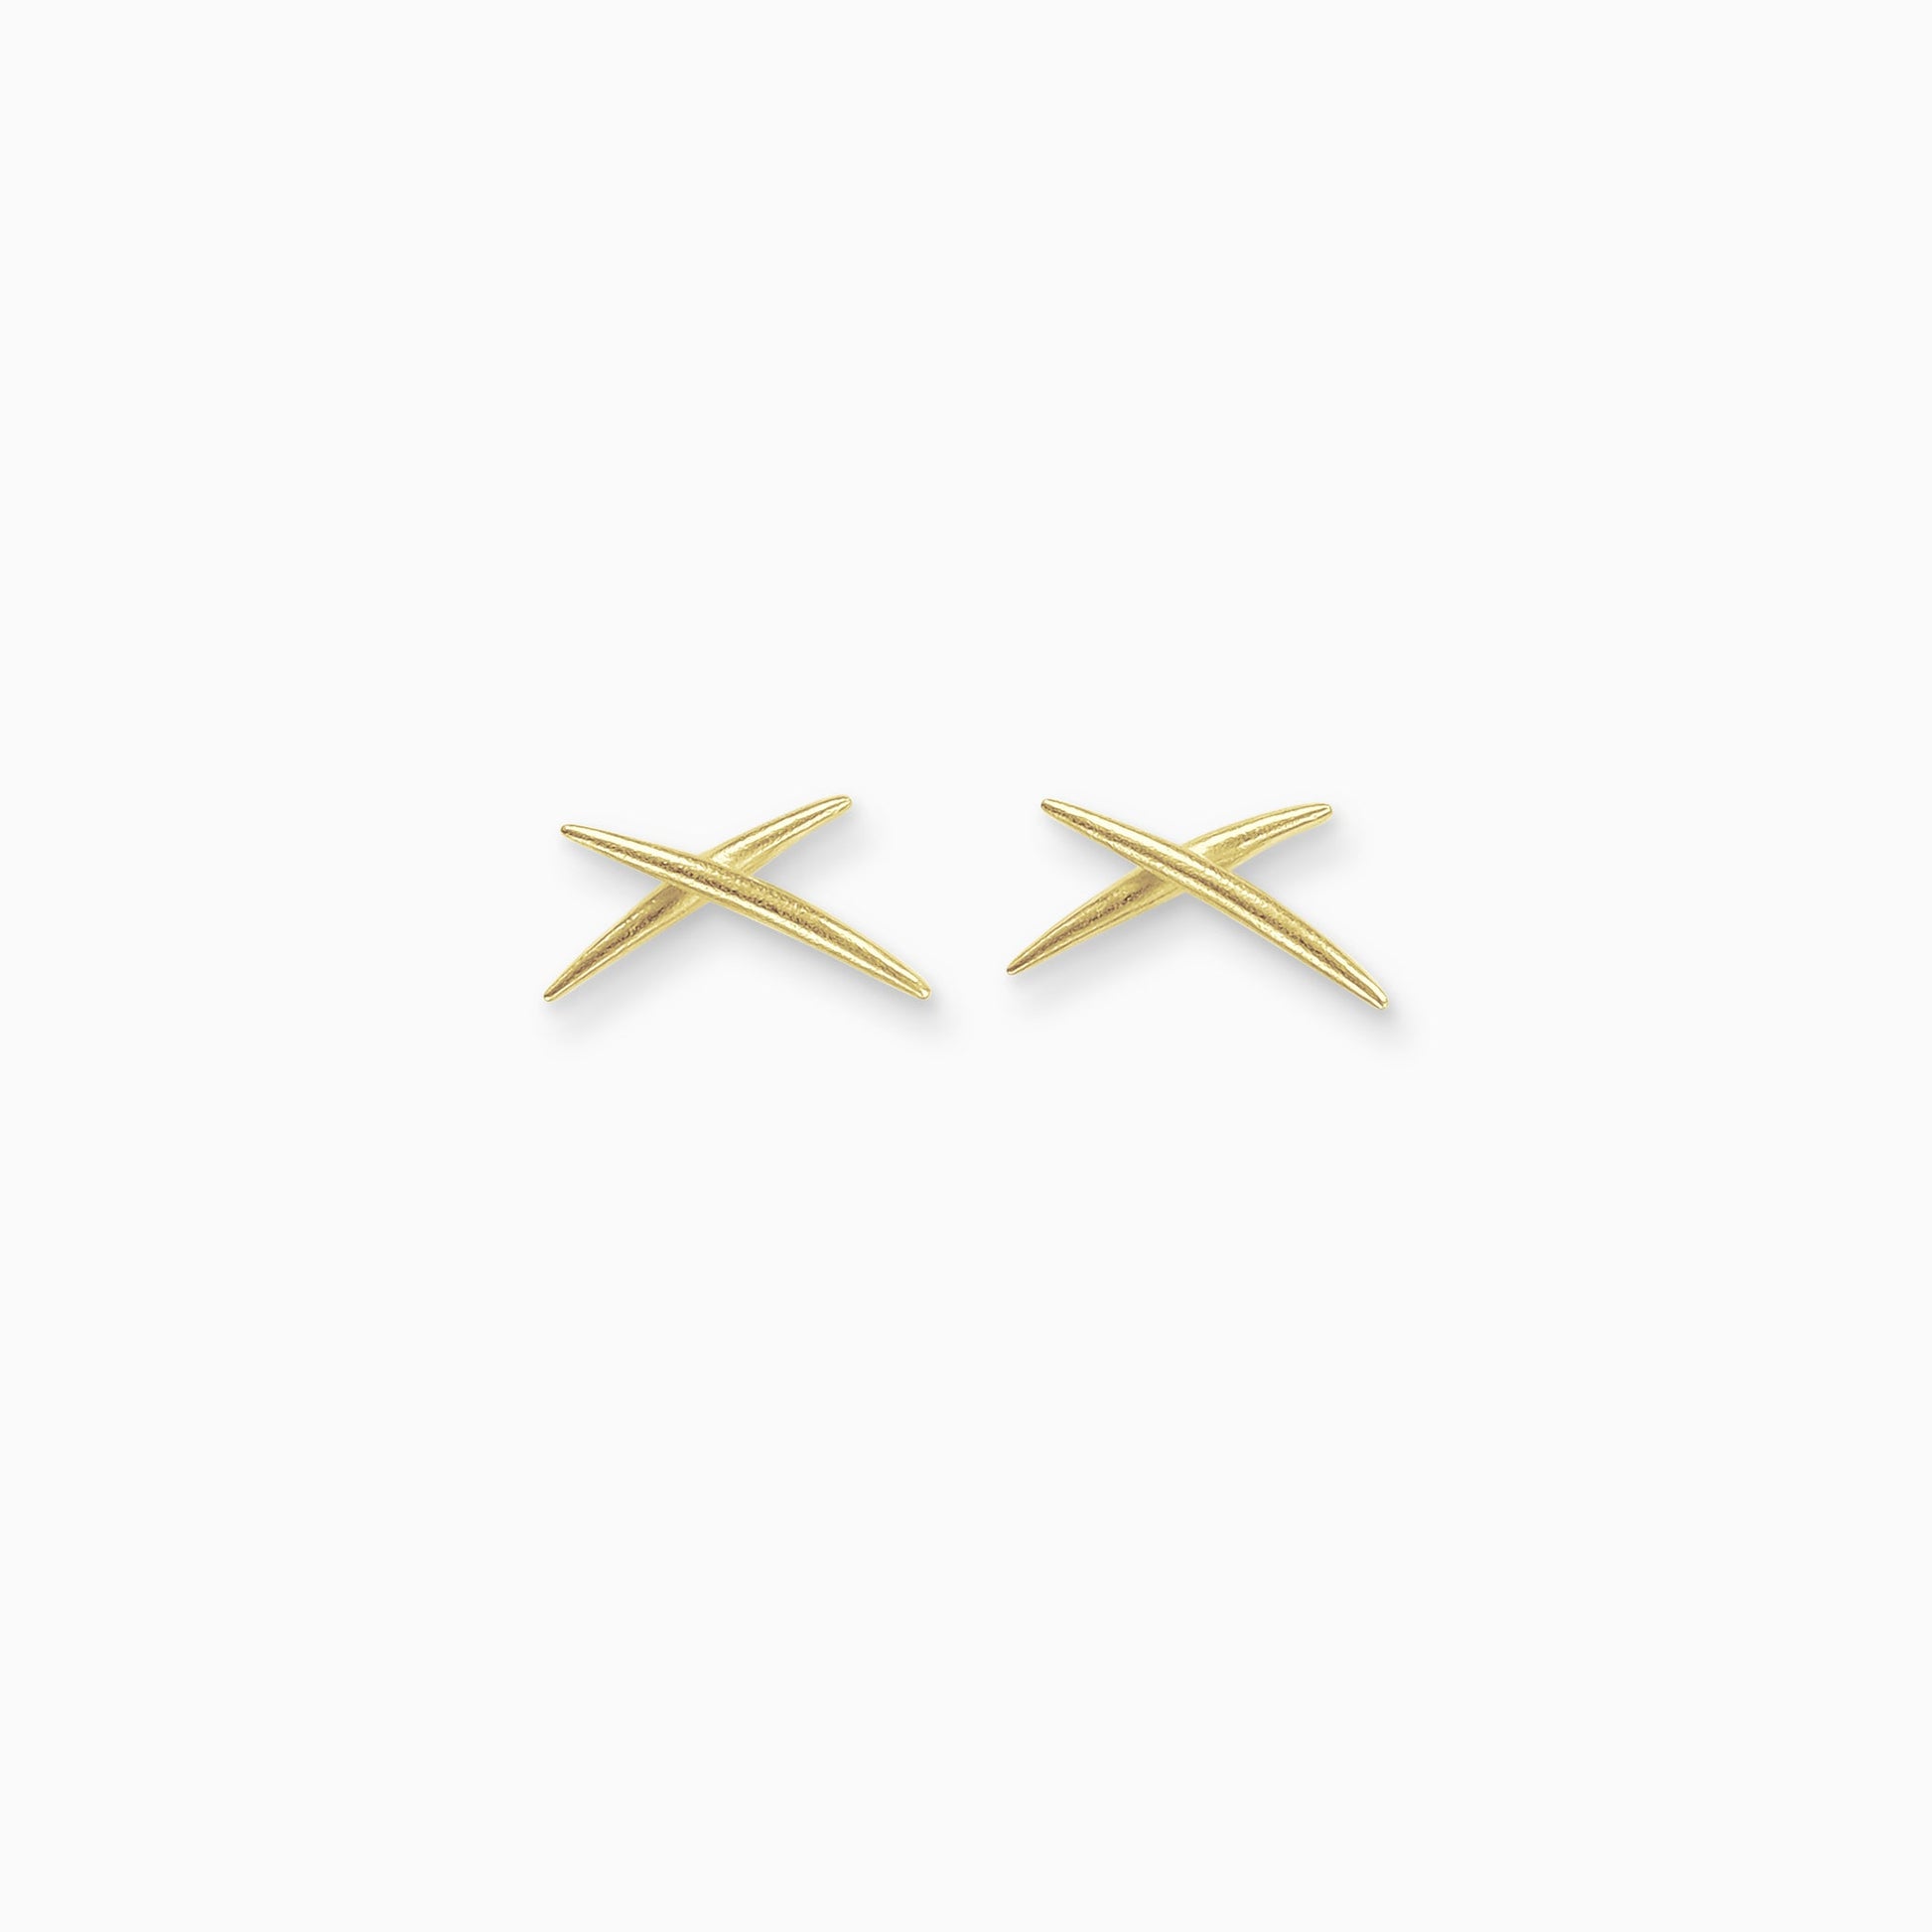 Dainty 18ct Fairtrade yellow gold stud earrings in the shape of a kiss, 2 fine bars of tapering round metal intersect to form an X shape.